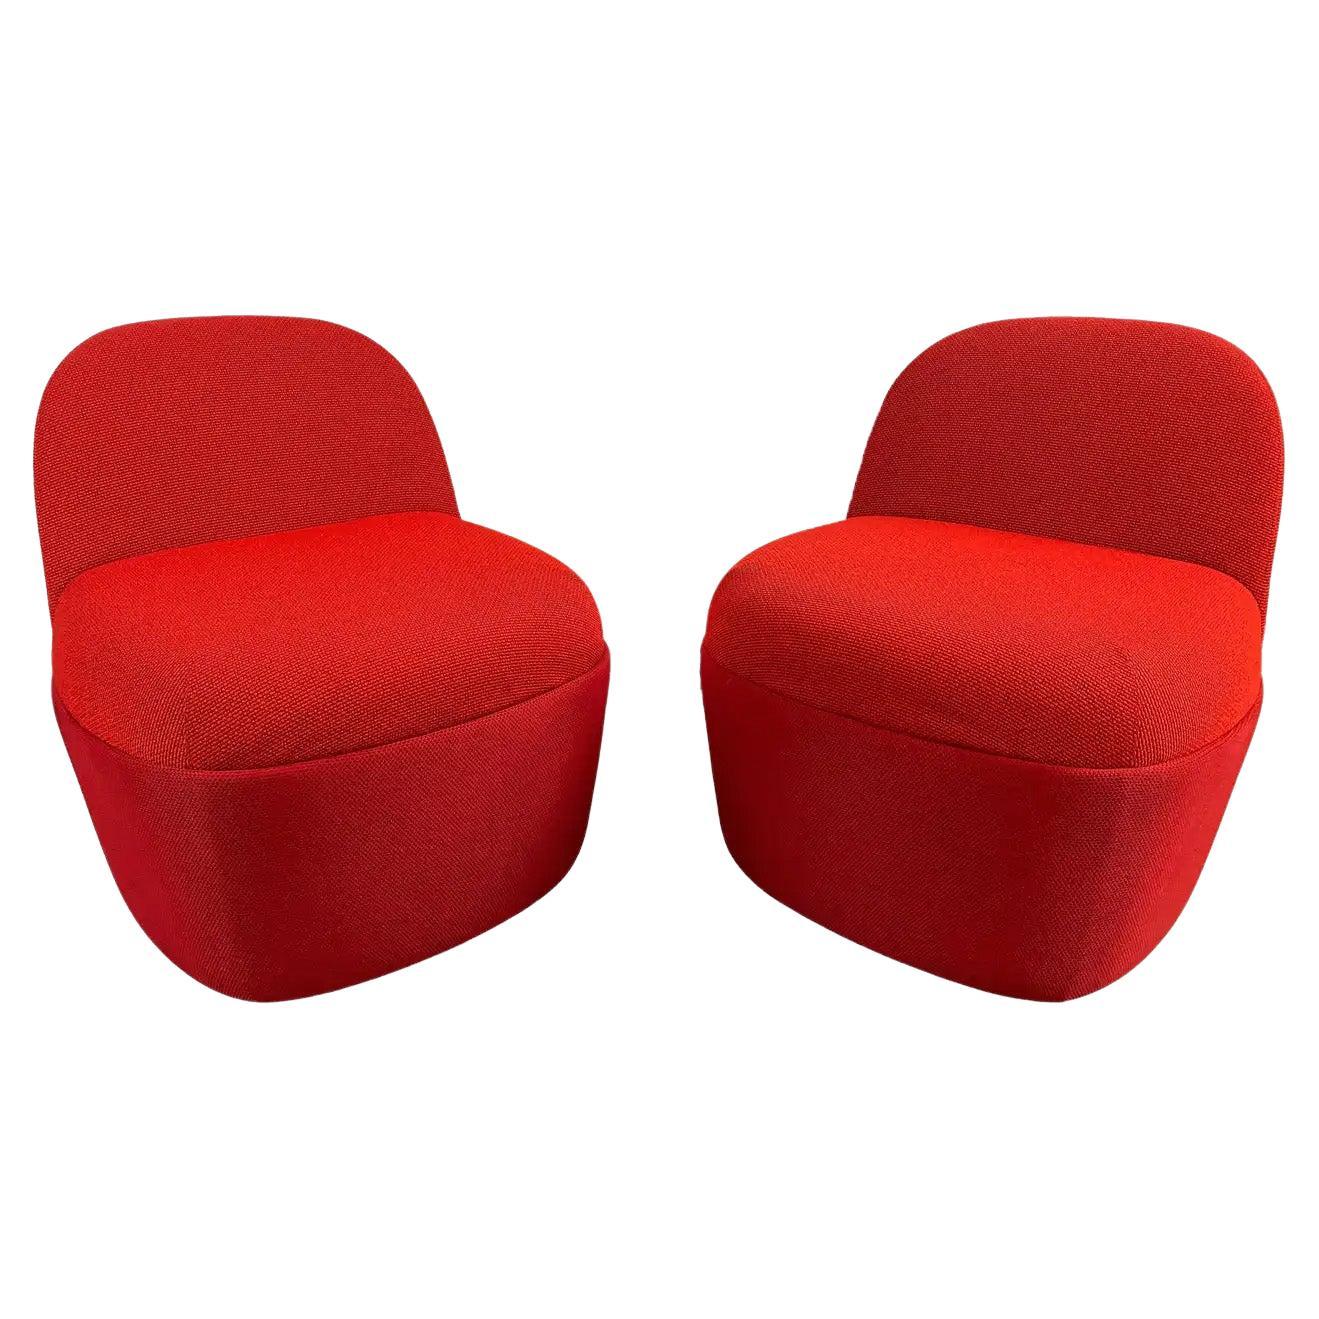 Modern Studio TK Custom Red Knit Fabric Slipper Chair or Pouf with Back, a Pair  For Sale